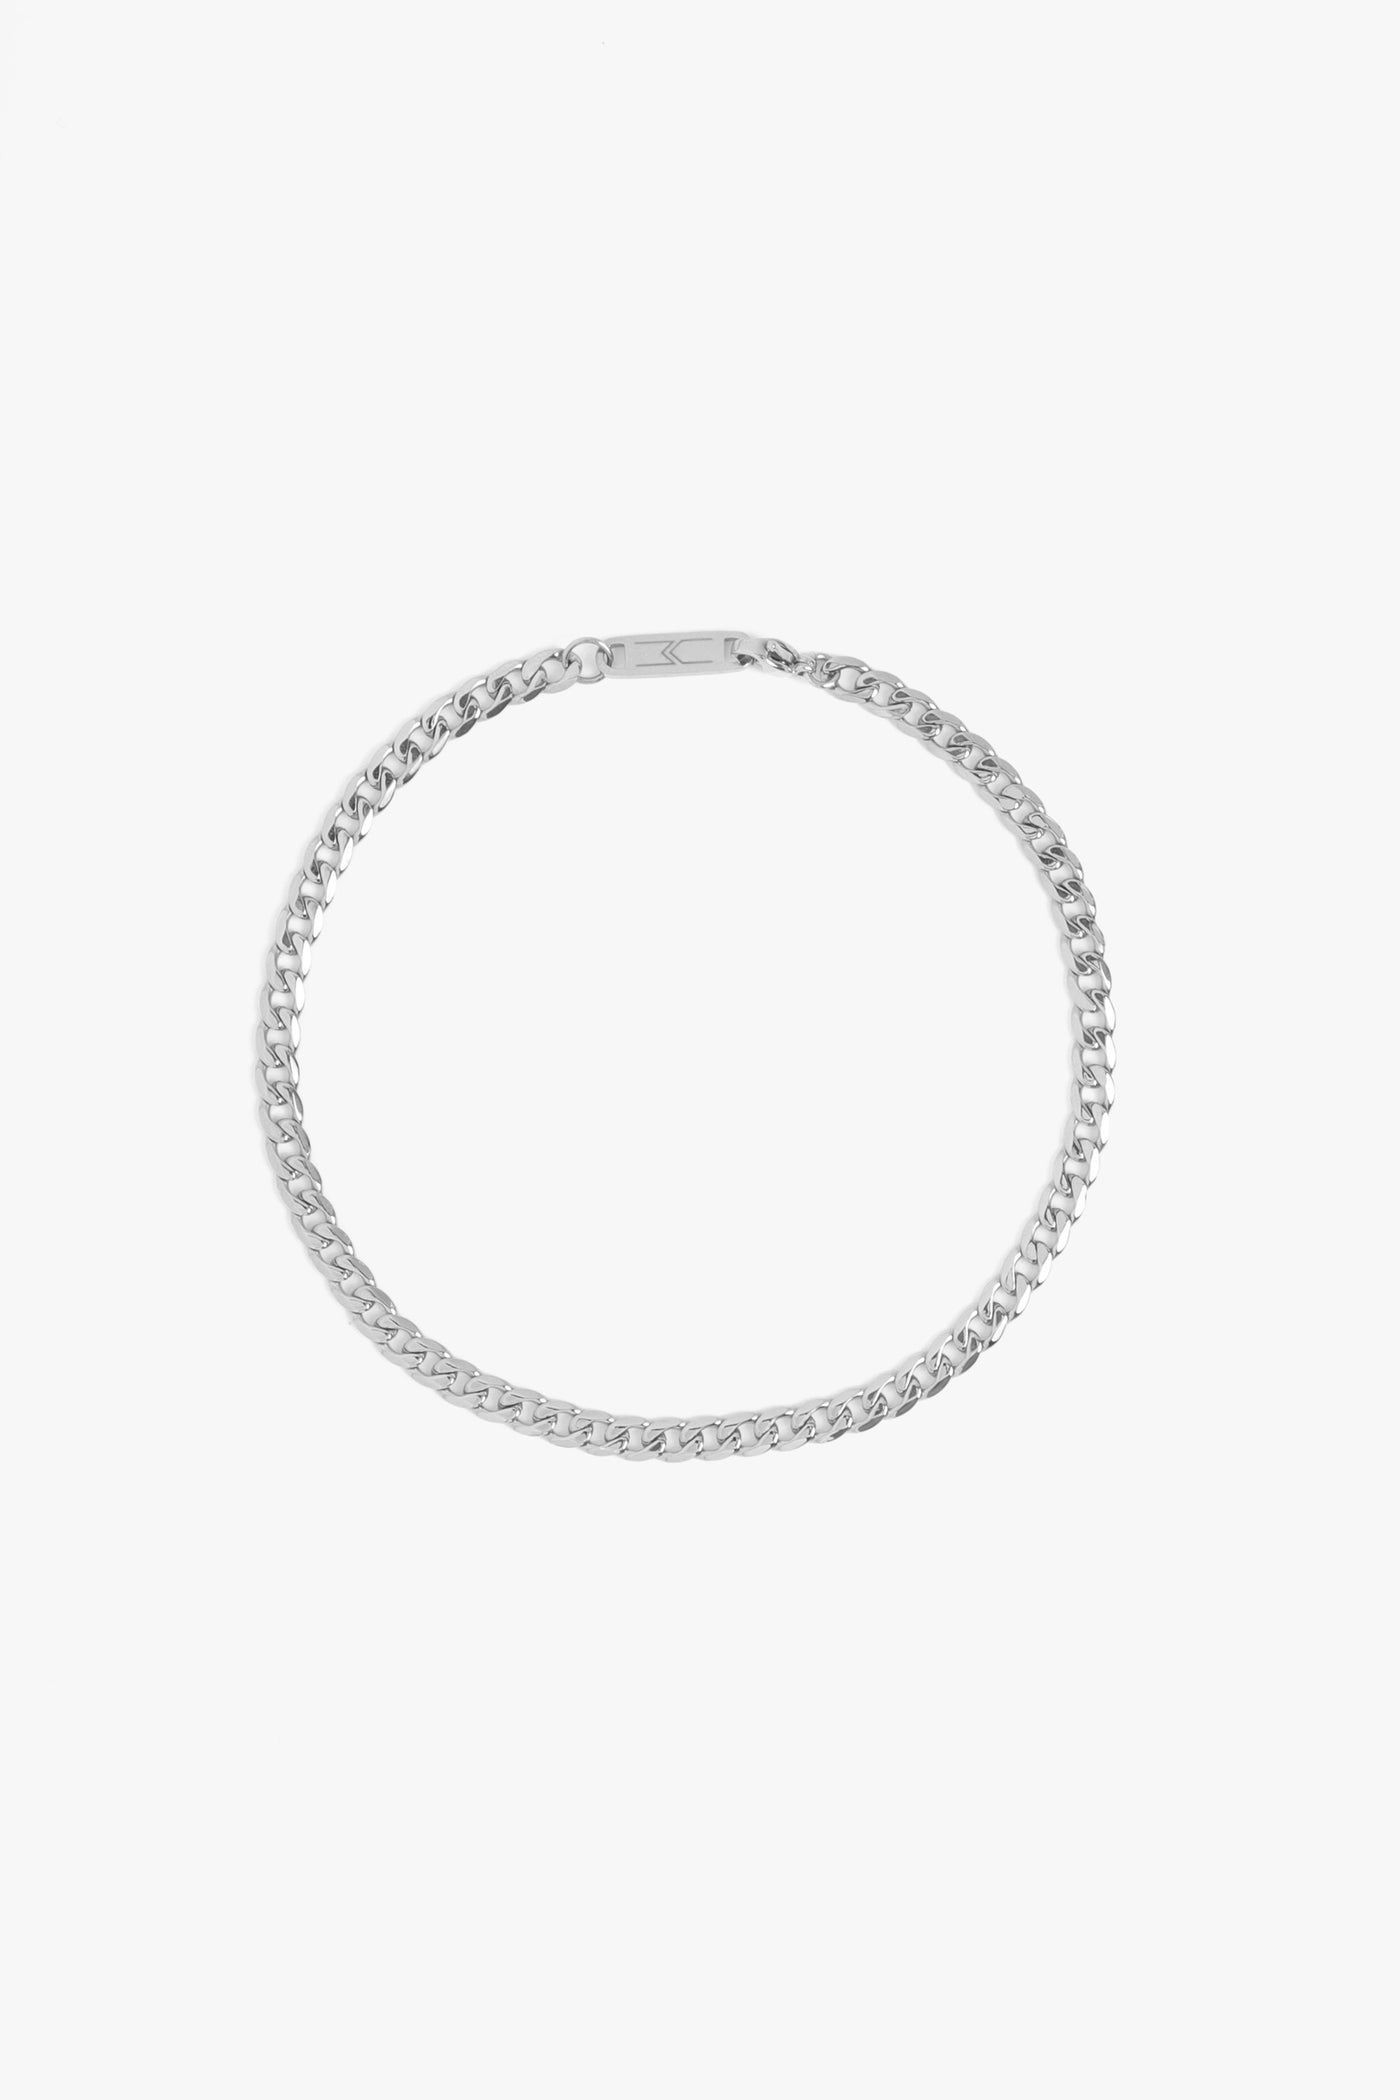 Marrin Costello Jewelry Callie Anklet small cuban link chain anklet with lobster clasp closure. Waterproof, sustainable, hypoallergenic. Polished stainless steel.